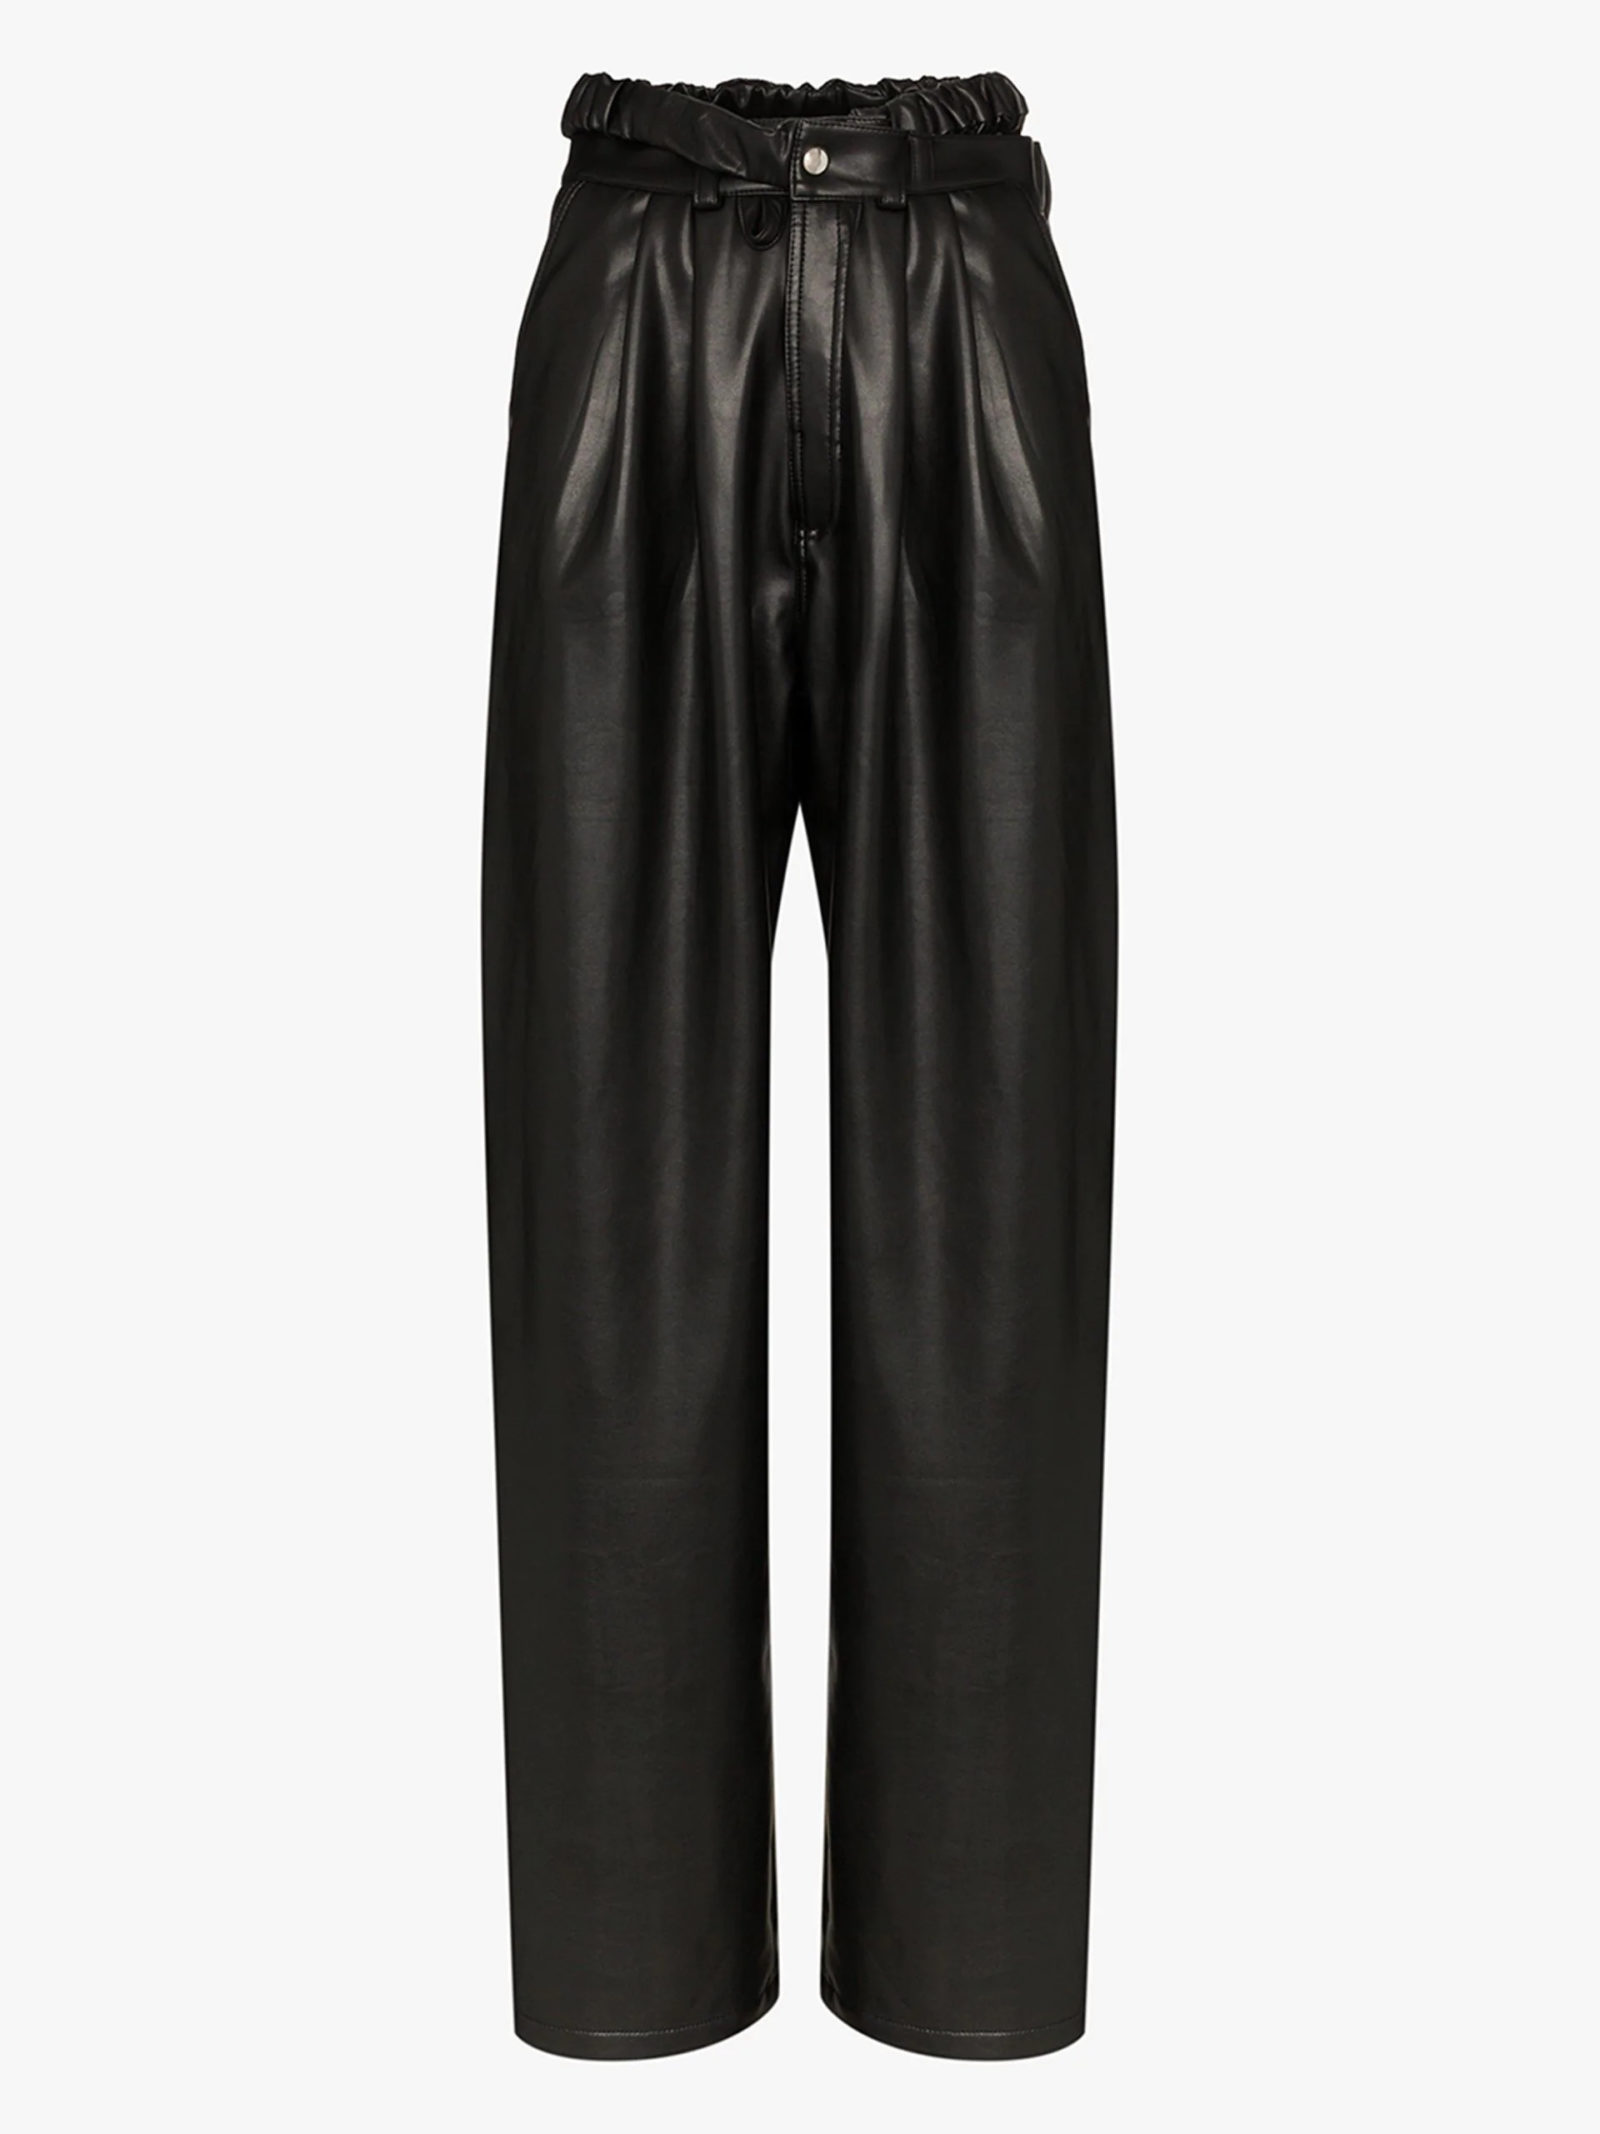 14 Pairs of Leather Pants to Suit Any Style - FASHION Magazine